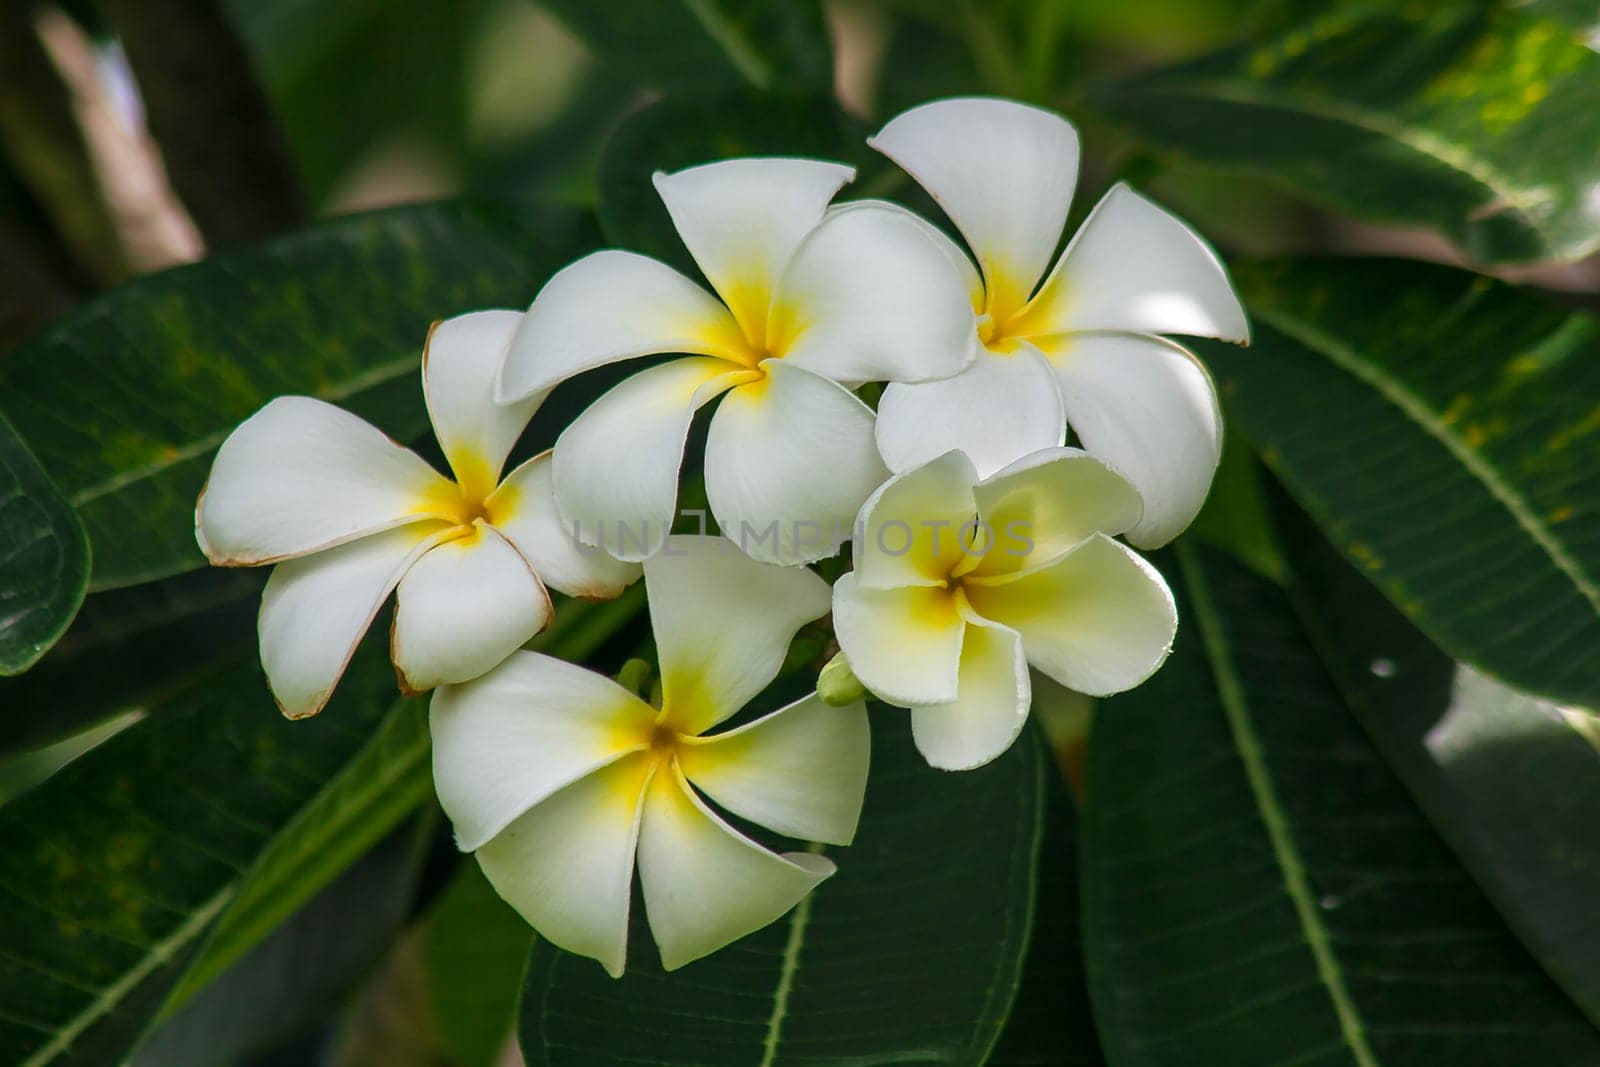 Yellow Frangipani that is blooming in nature